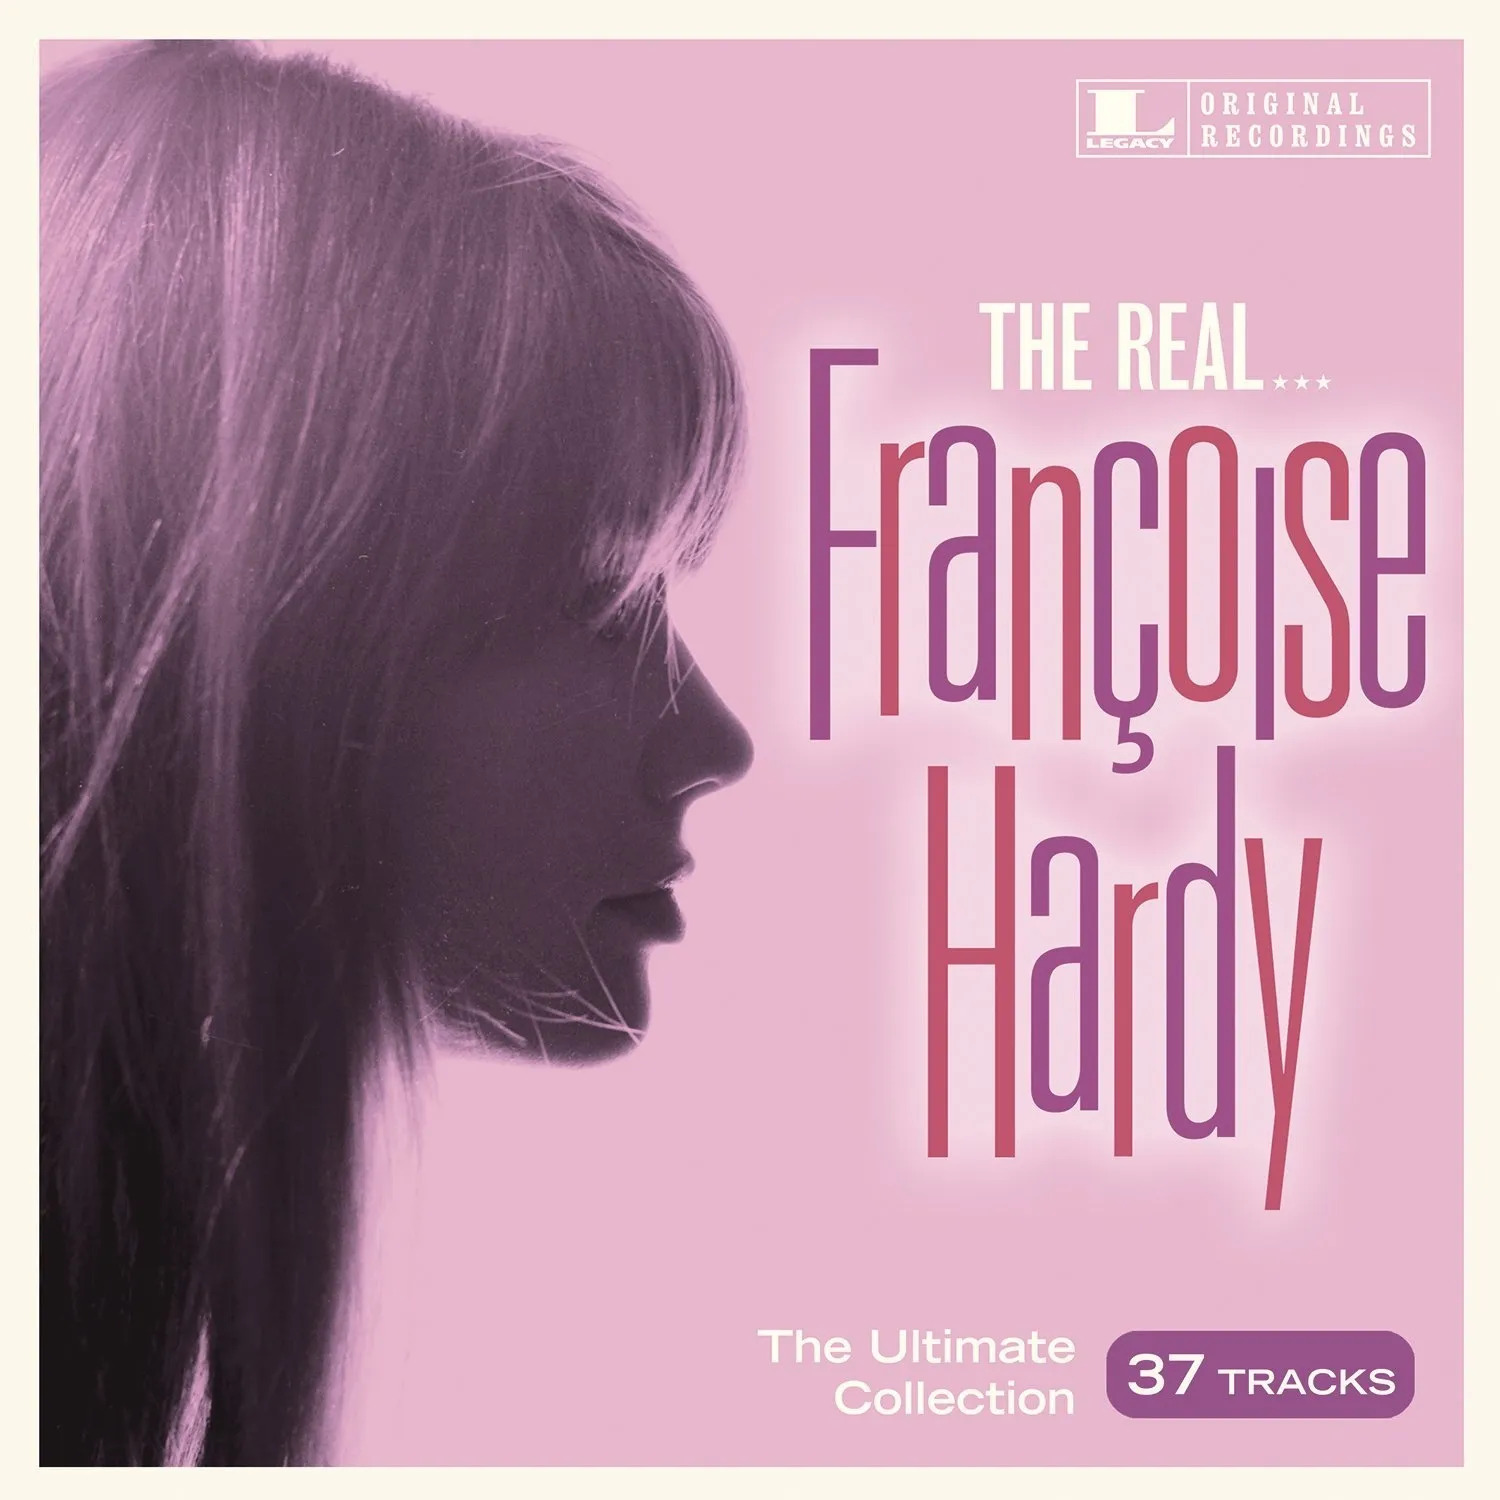 Francoise Hardy - The Real... Francoise Hardy - Good Times Direct